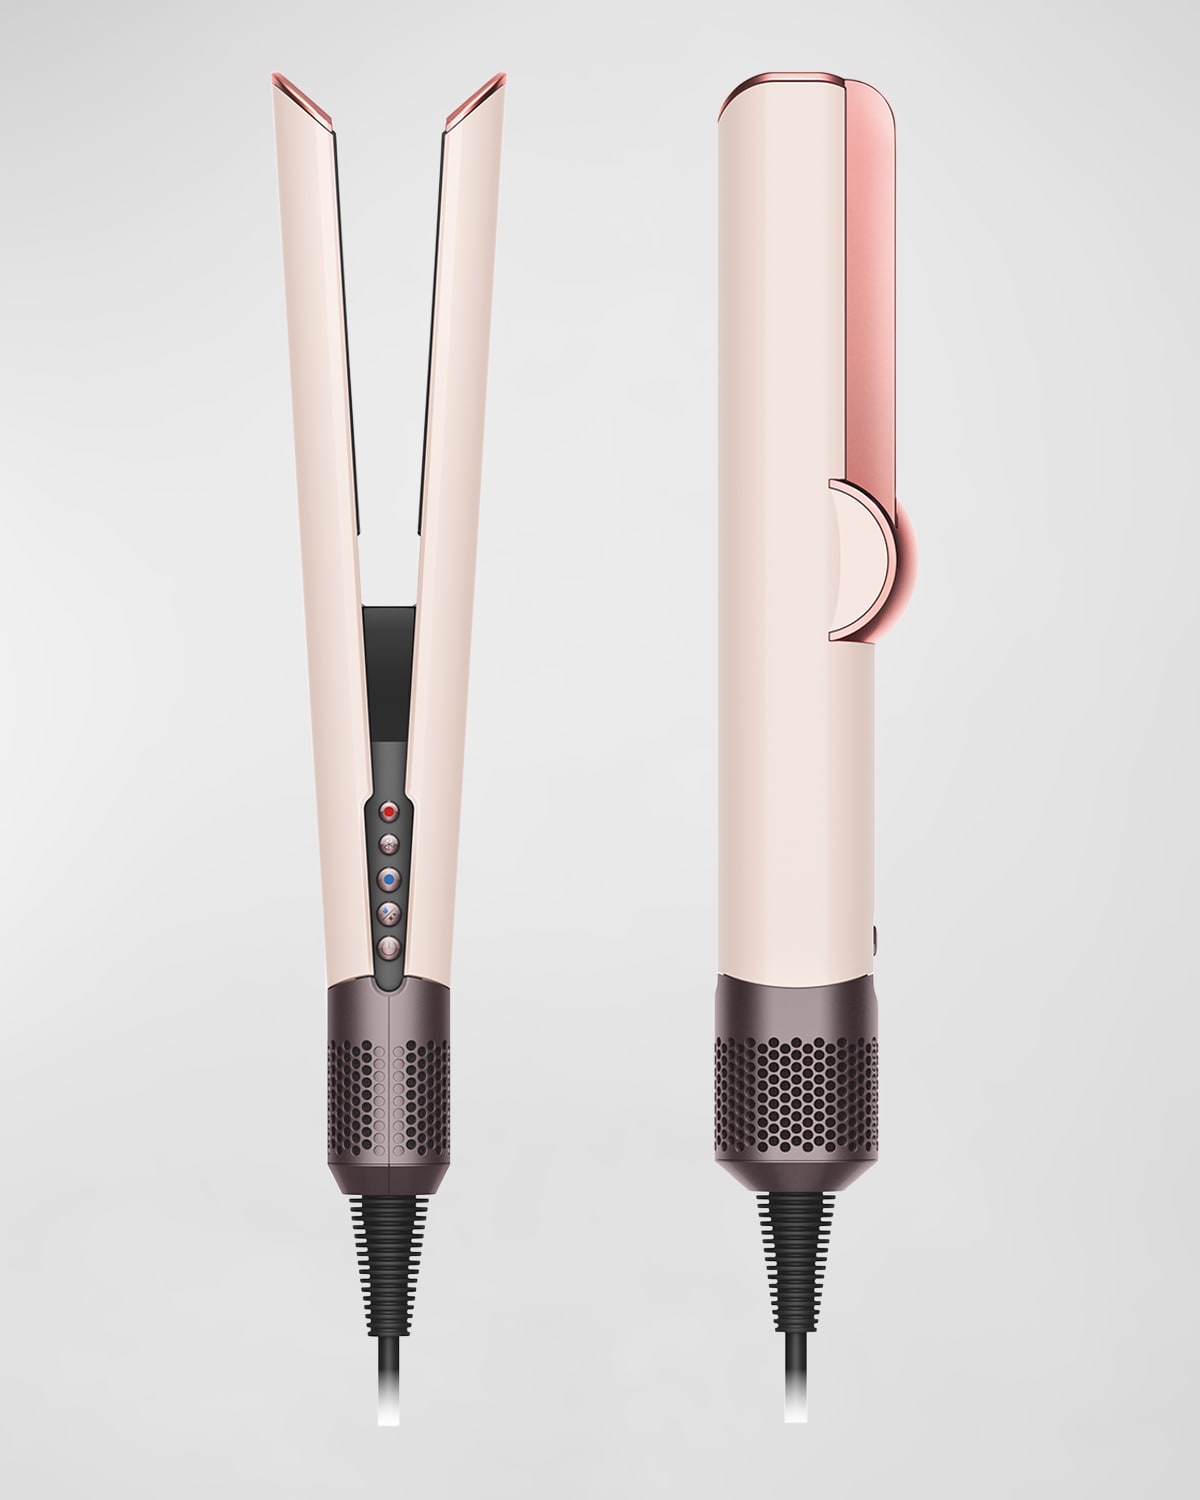 Shop Dyson Limited Edition Airstrait Straightener In Ceramic Pink And Rose Gold